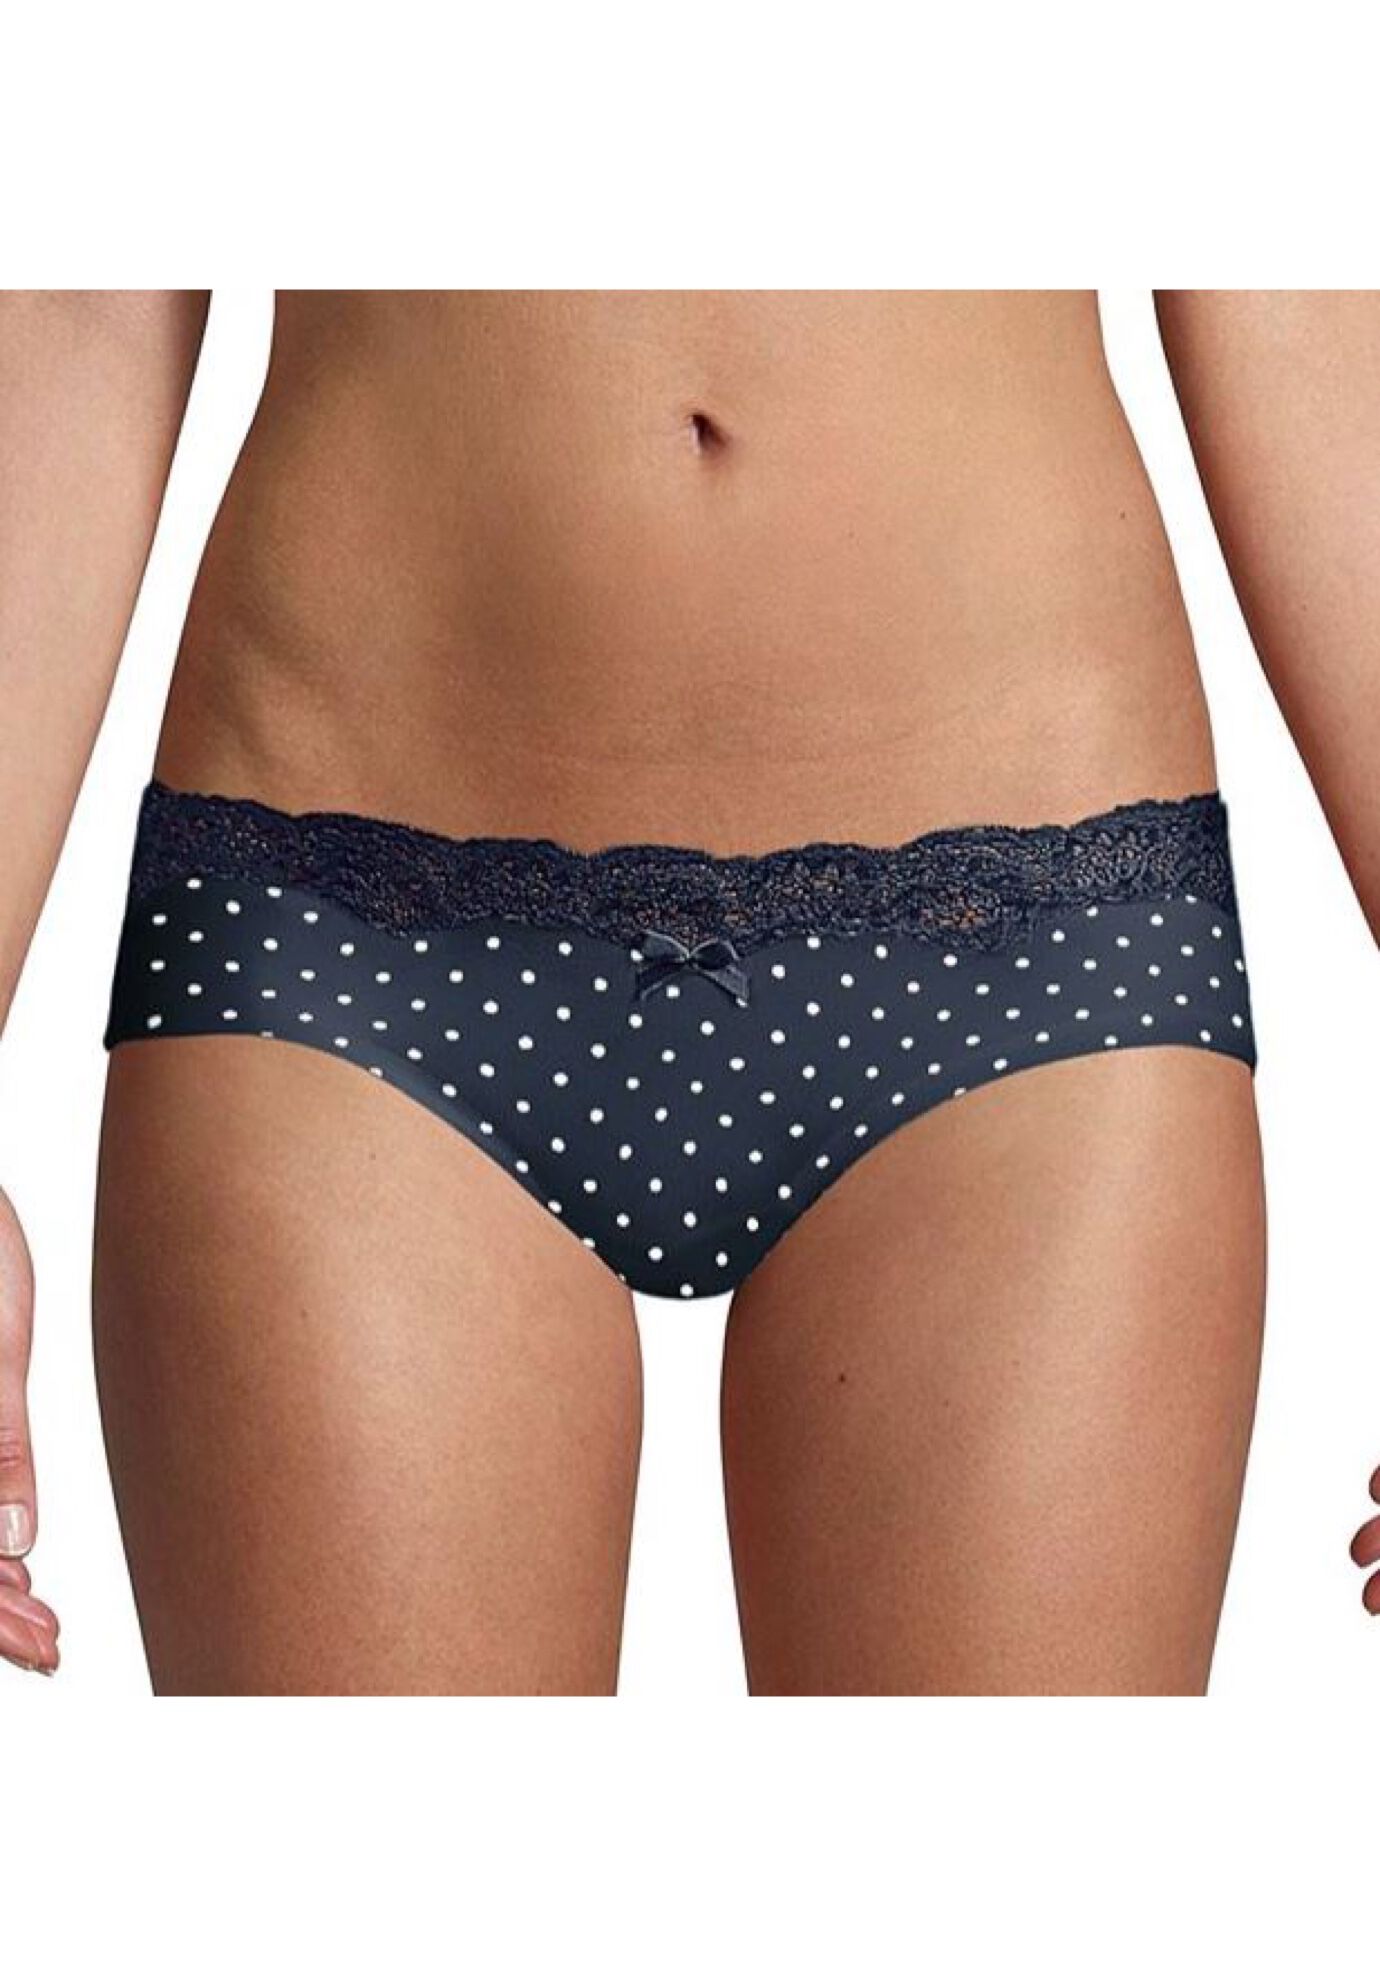 Plus Size Women's Comfort Devotion Embellished Hipster by Maidenform in Navy White Dot (Size 6)